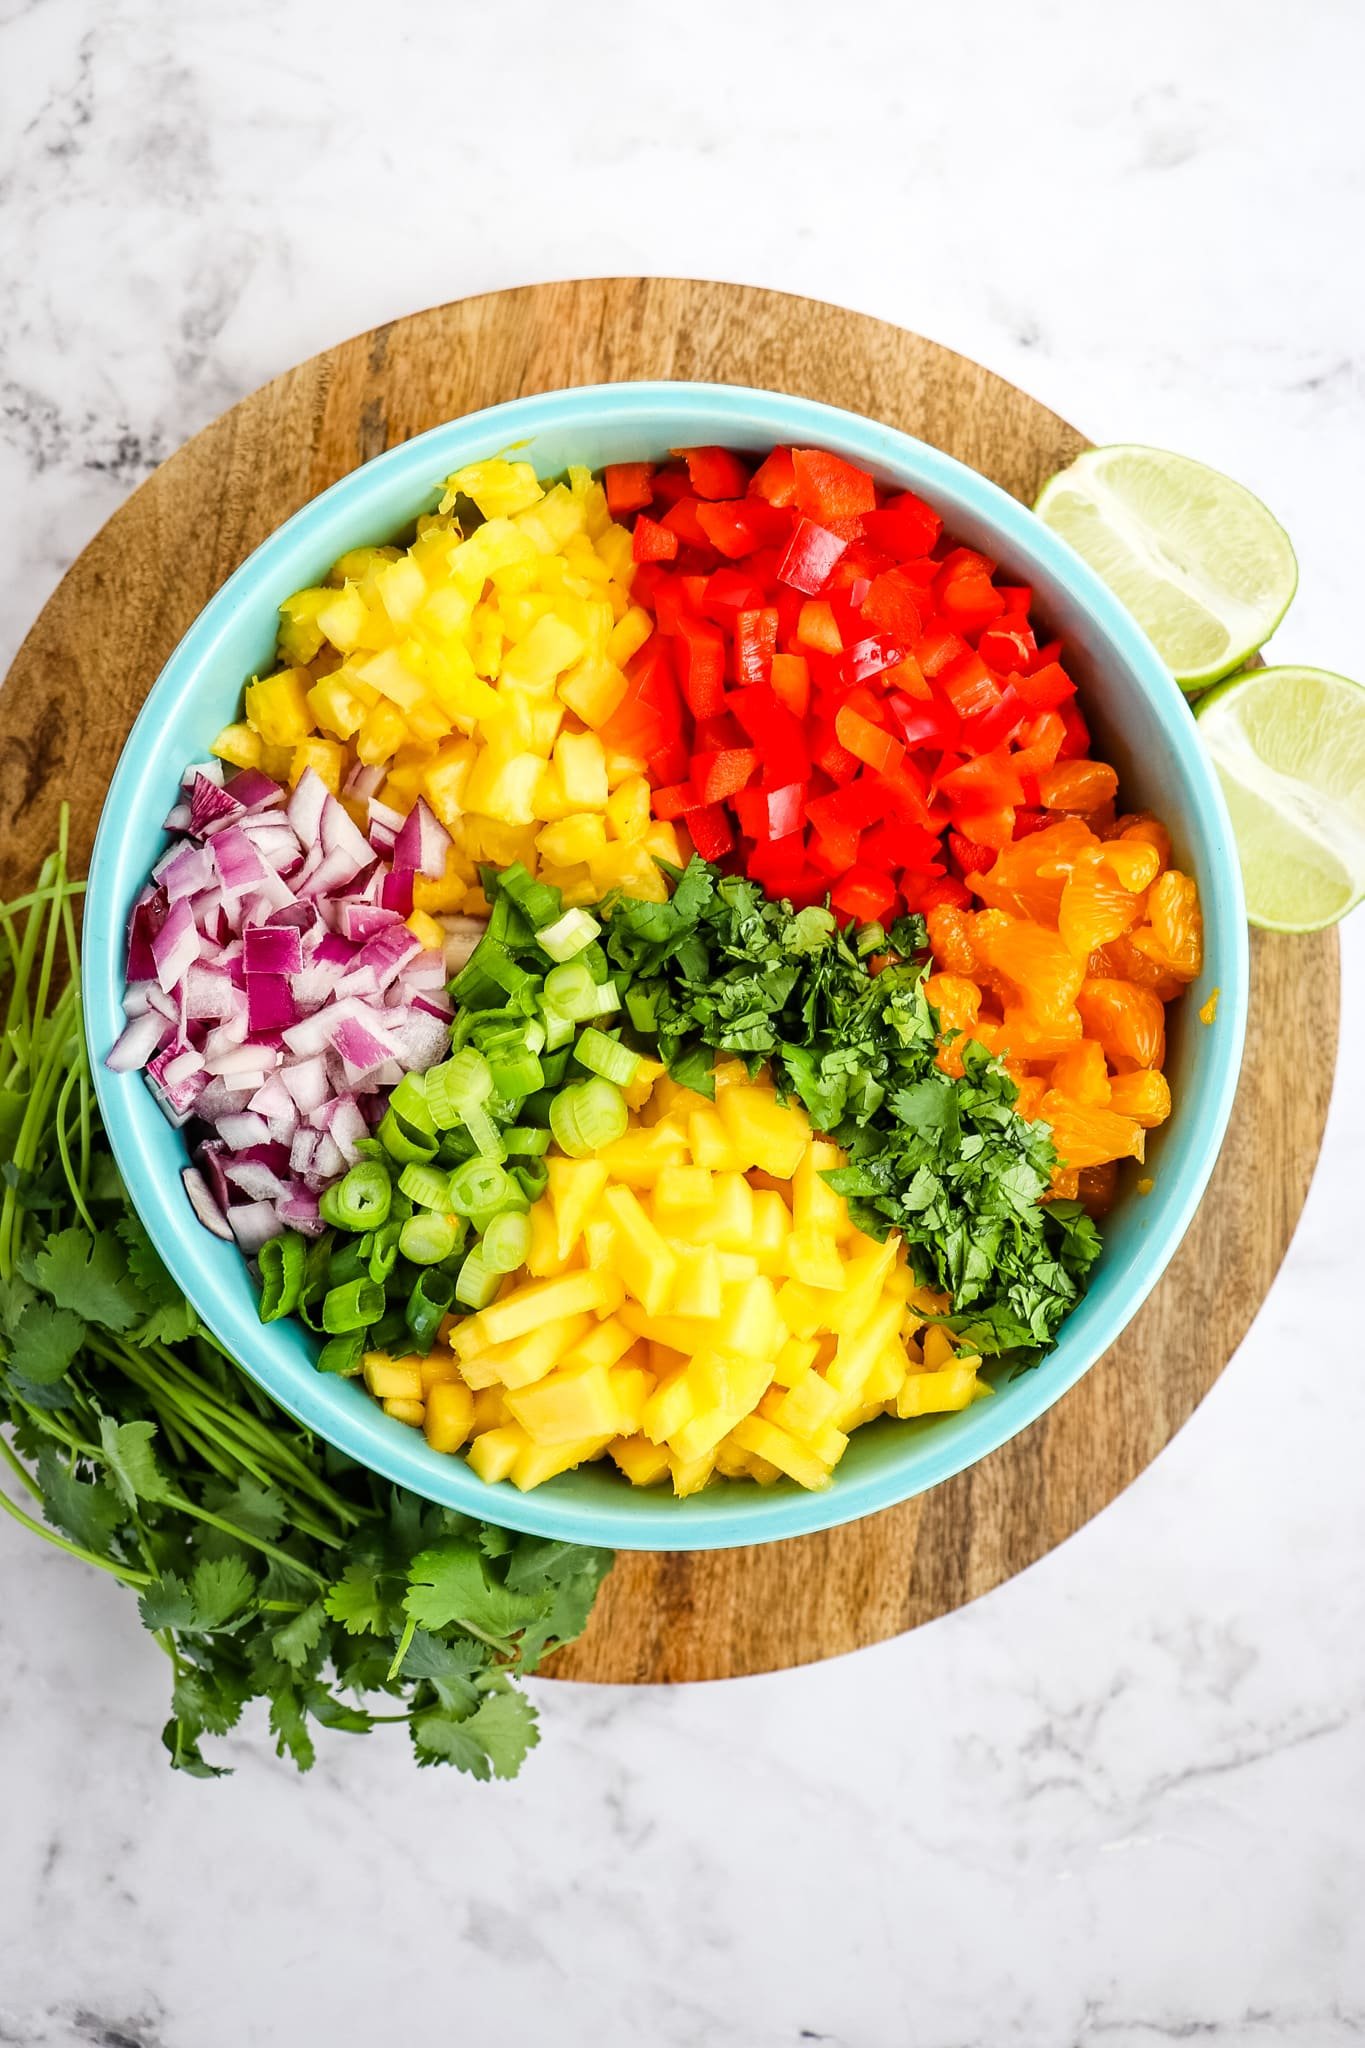 Chopped ingredients for pineapple mango salsa in blue bowl.